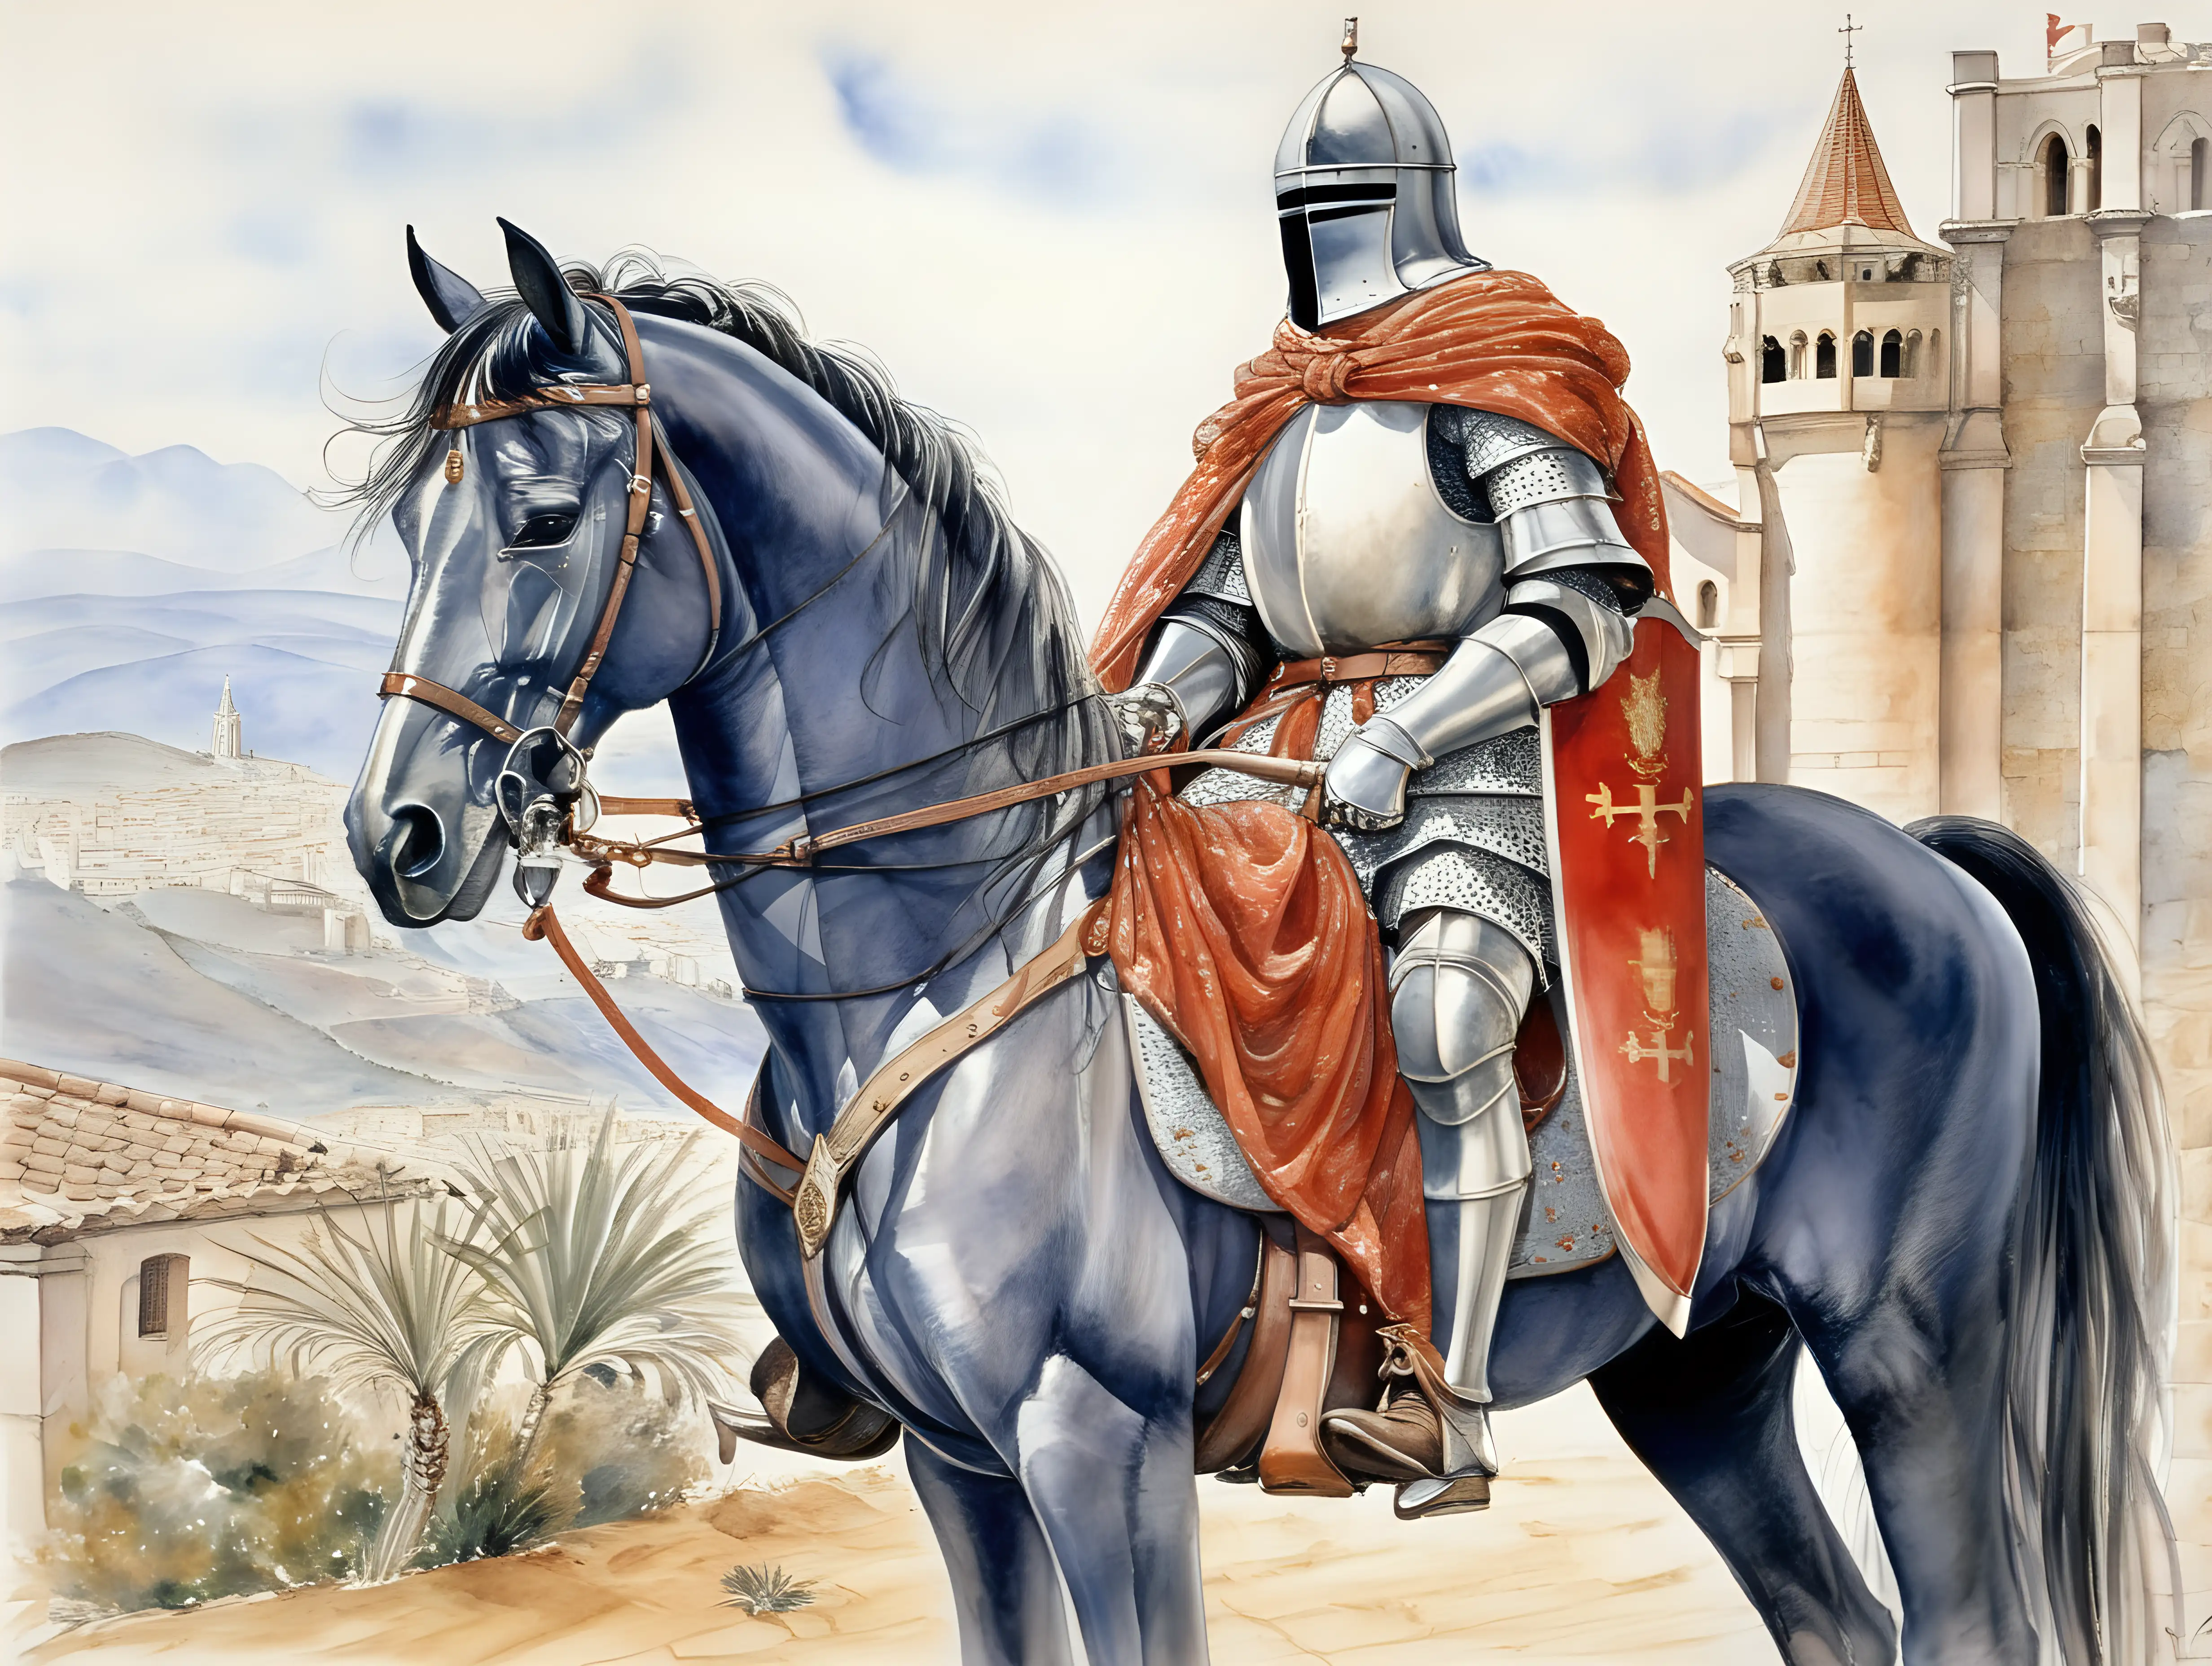 Milo Manaras Watercolor Depiction of the Knight of Santiago in Stunning Detail